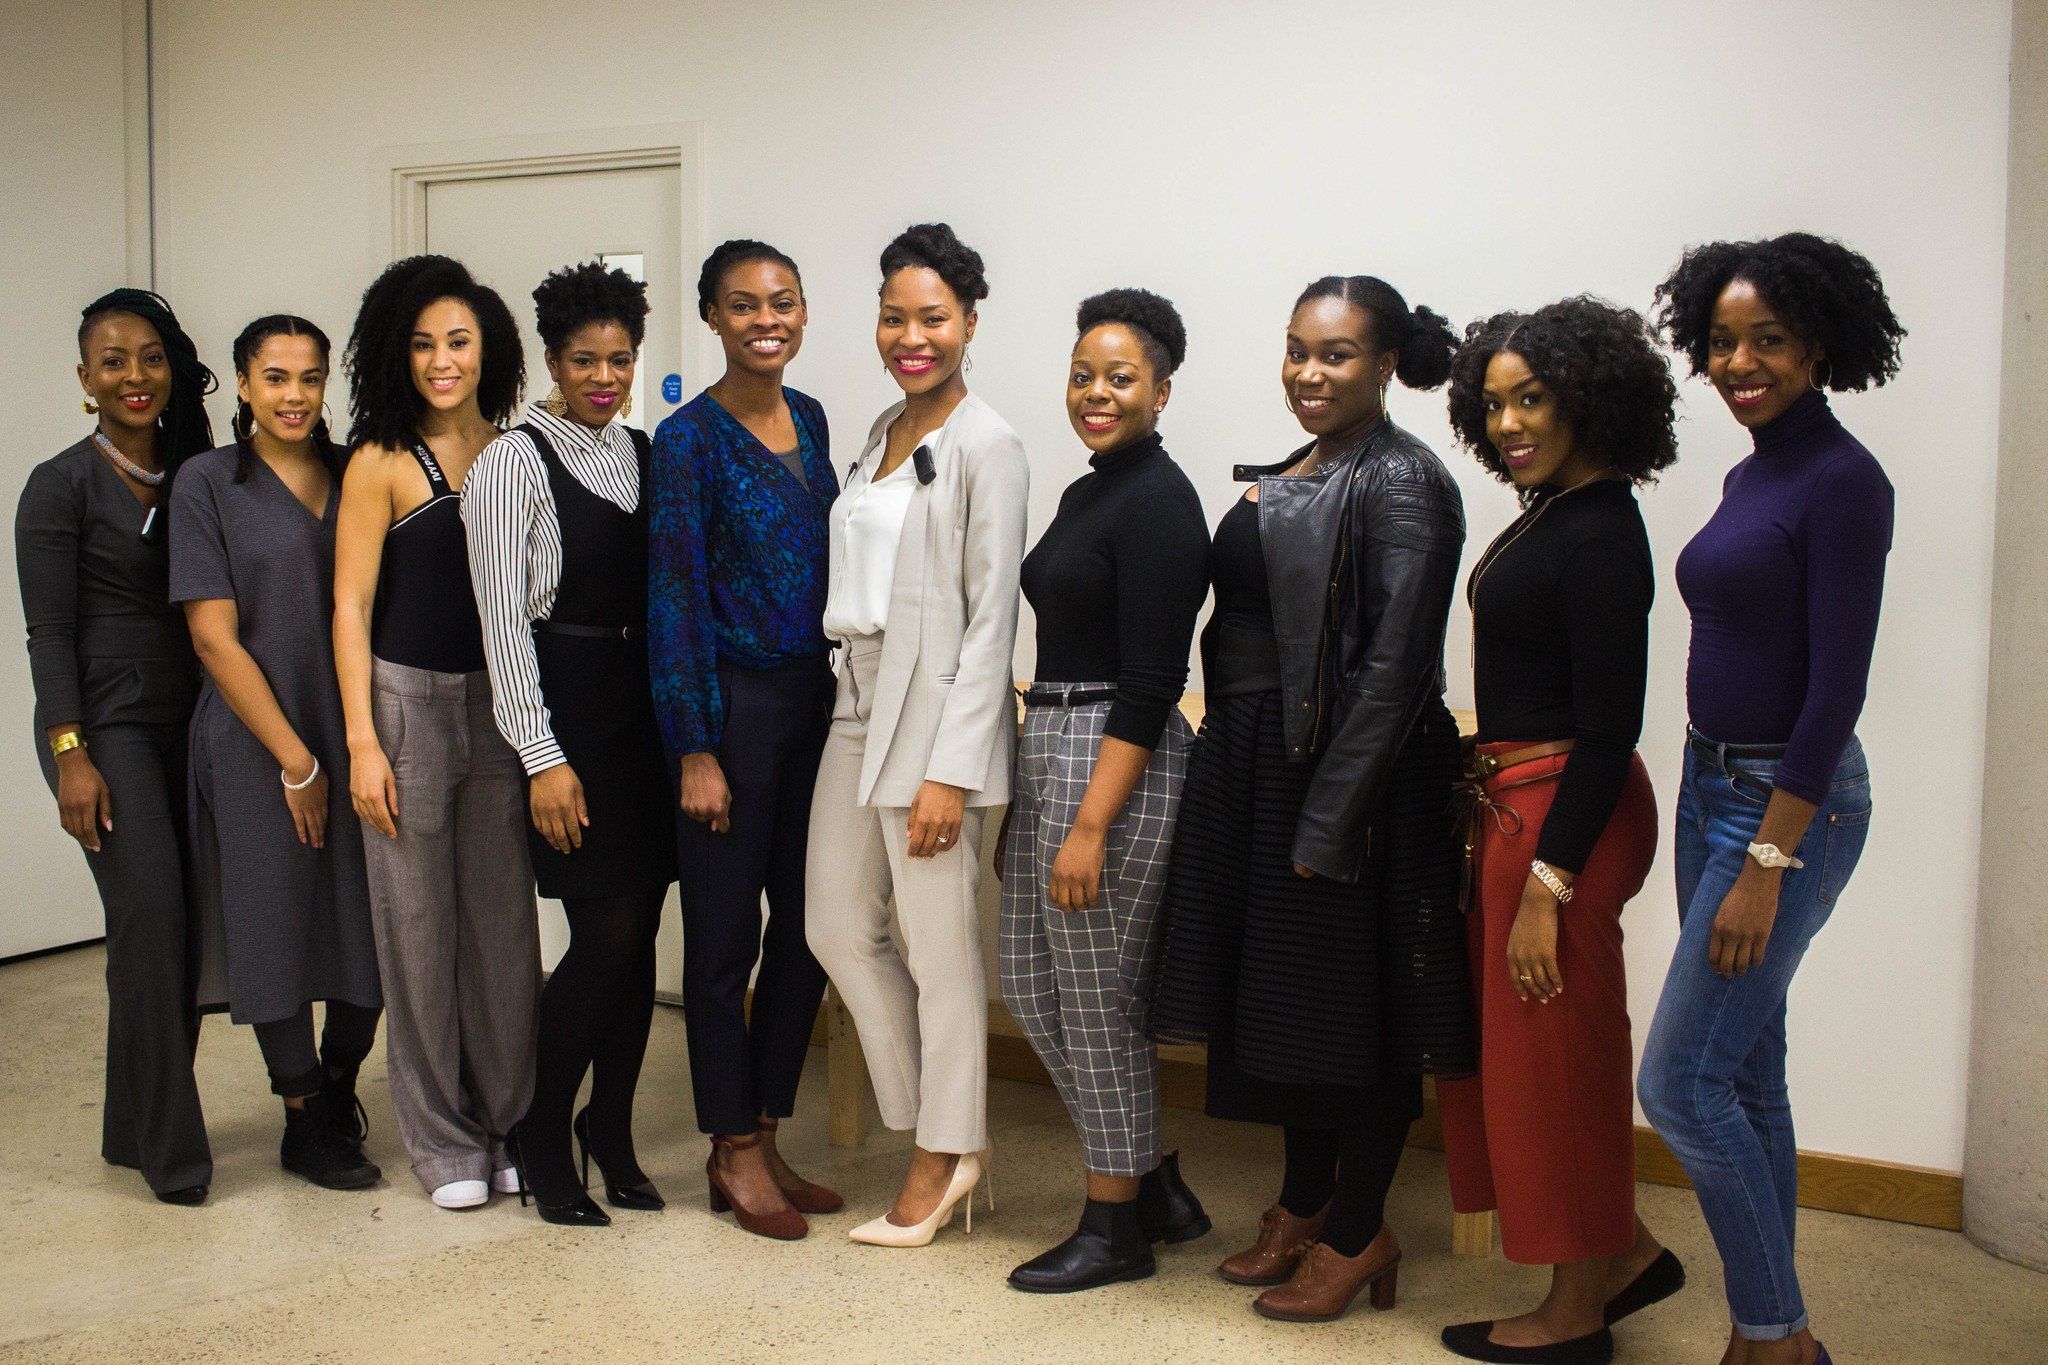 Is Natural Hair Professional? - #HairCare101 Event Summary